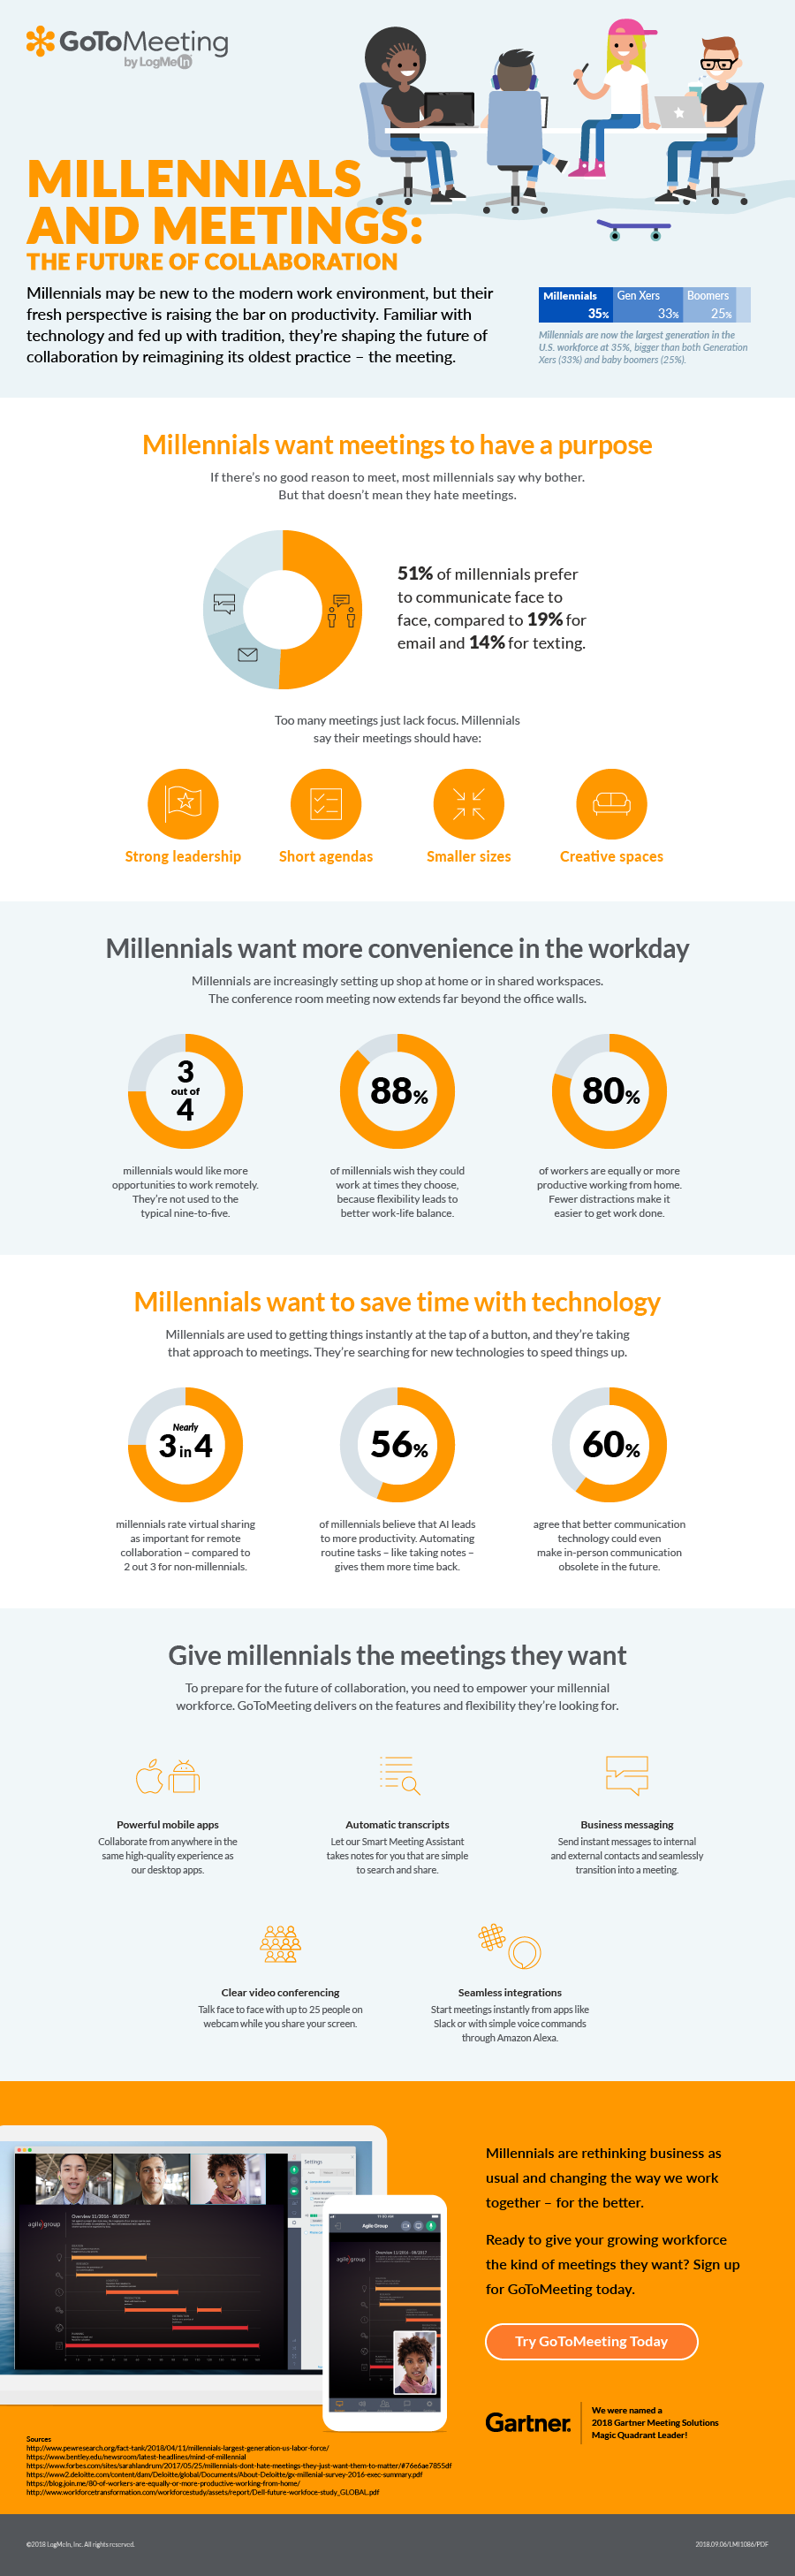 GoToMeeting Infographic: The Hidden COst of Meeting Software